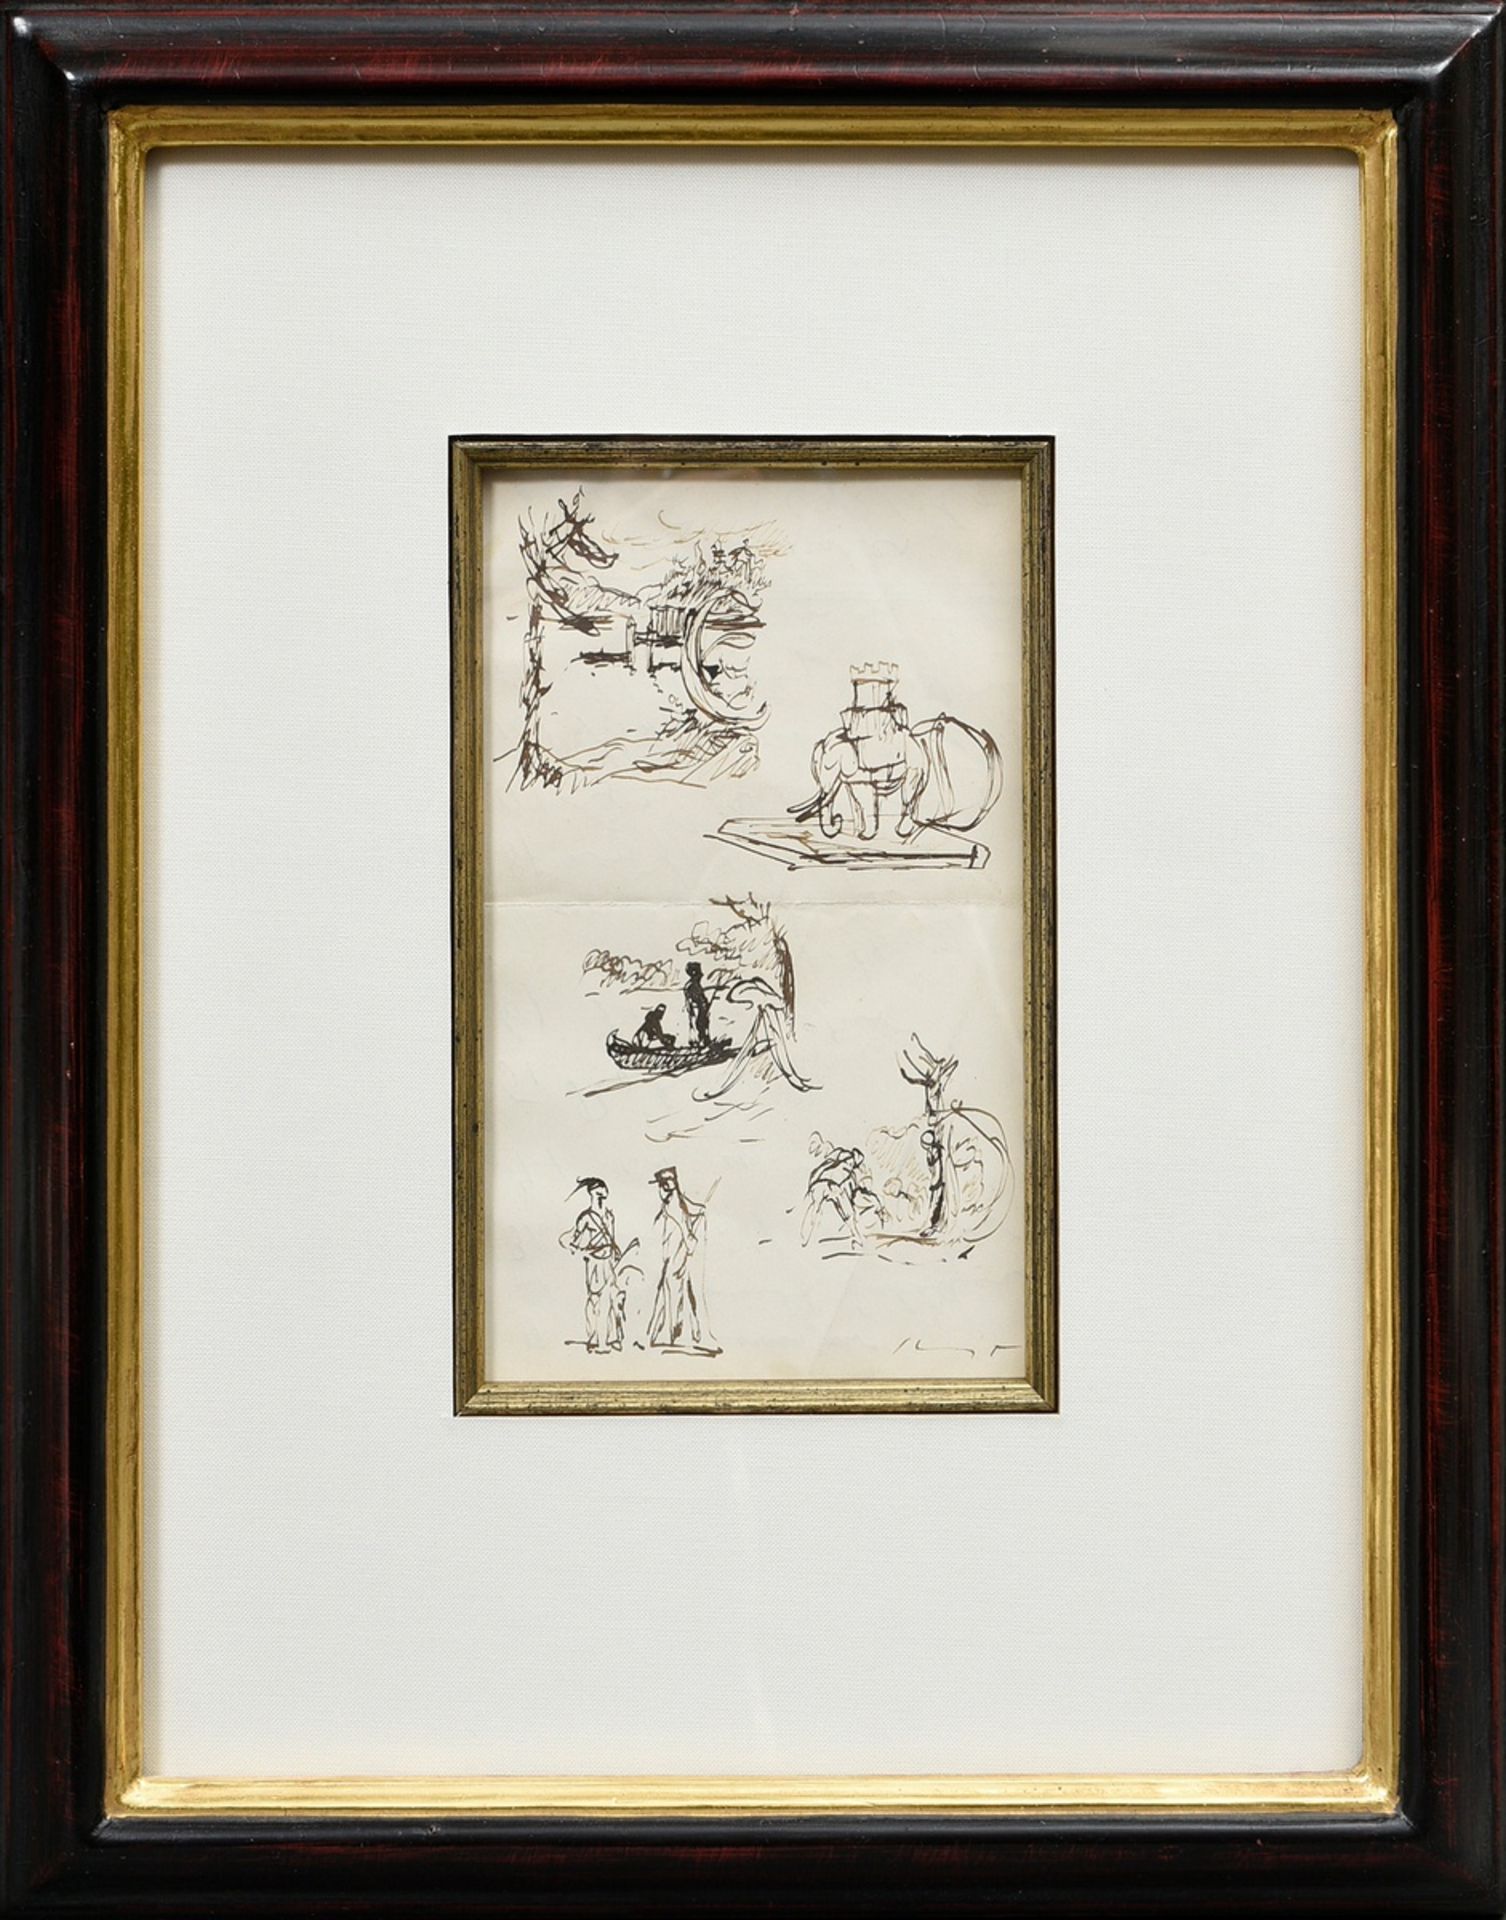 Slevogt, Max (1868-1932) "Vignette Studies", pen-and-ink drawing, sign. on the lower right, inscr.  - Image 2 of 5